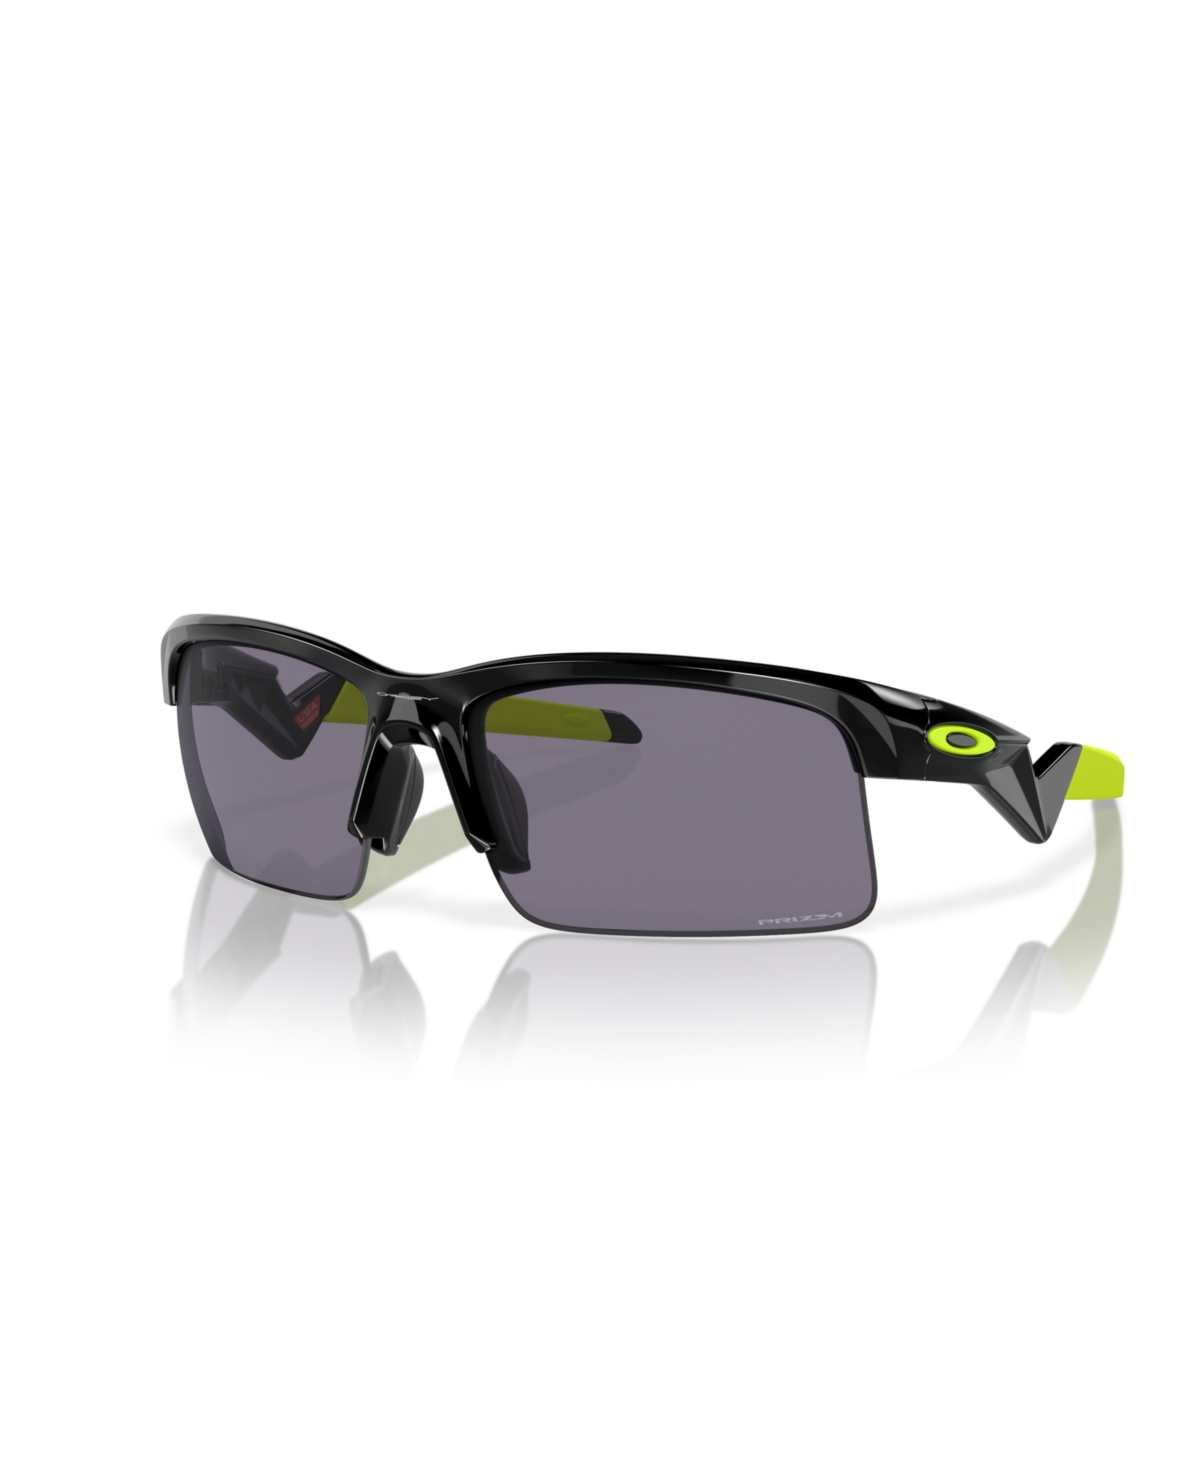 Oakley Jr Kid's Sunglasses, Capacitor Youth Fit Oj9013 In Polished Black